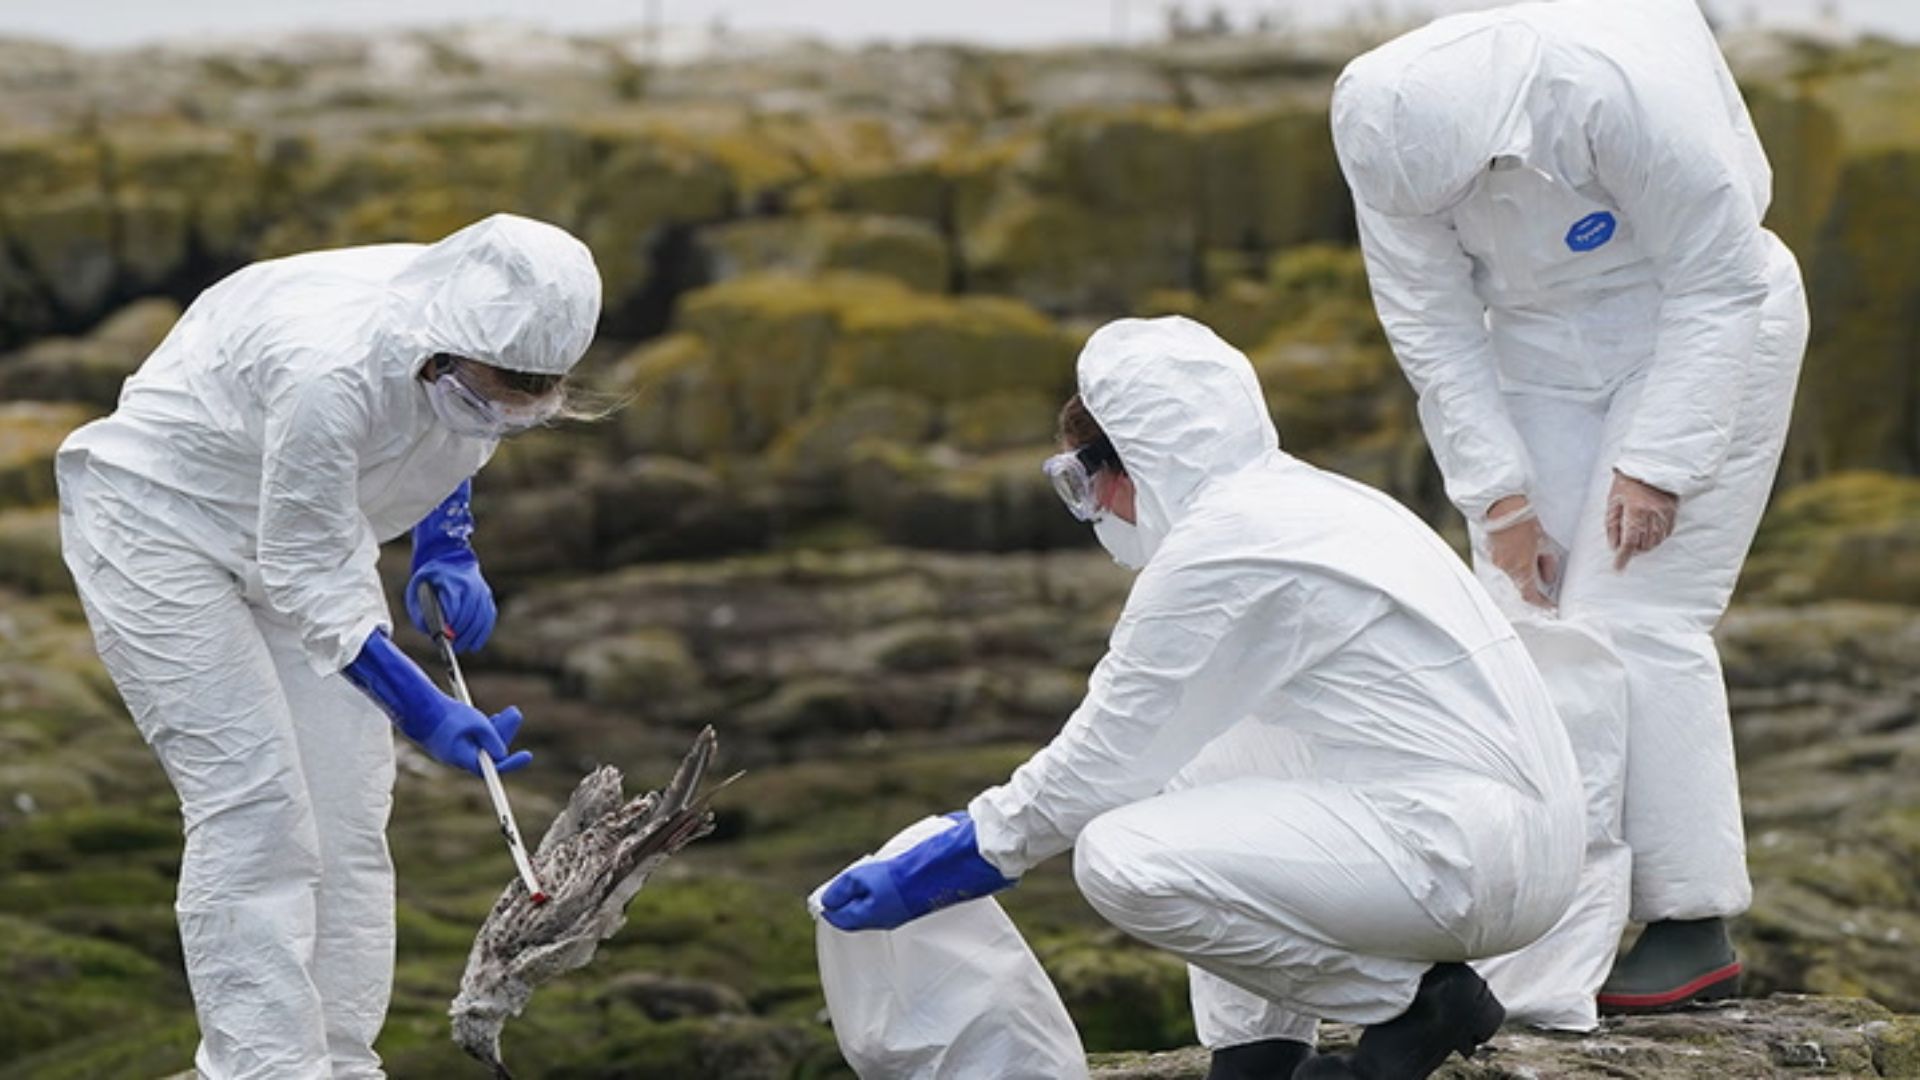 Bird flu could be “100 times worse” than COVID-19, scientists warn